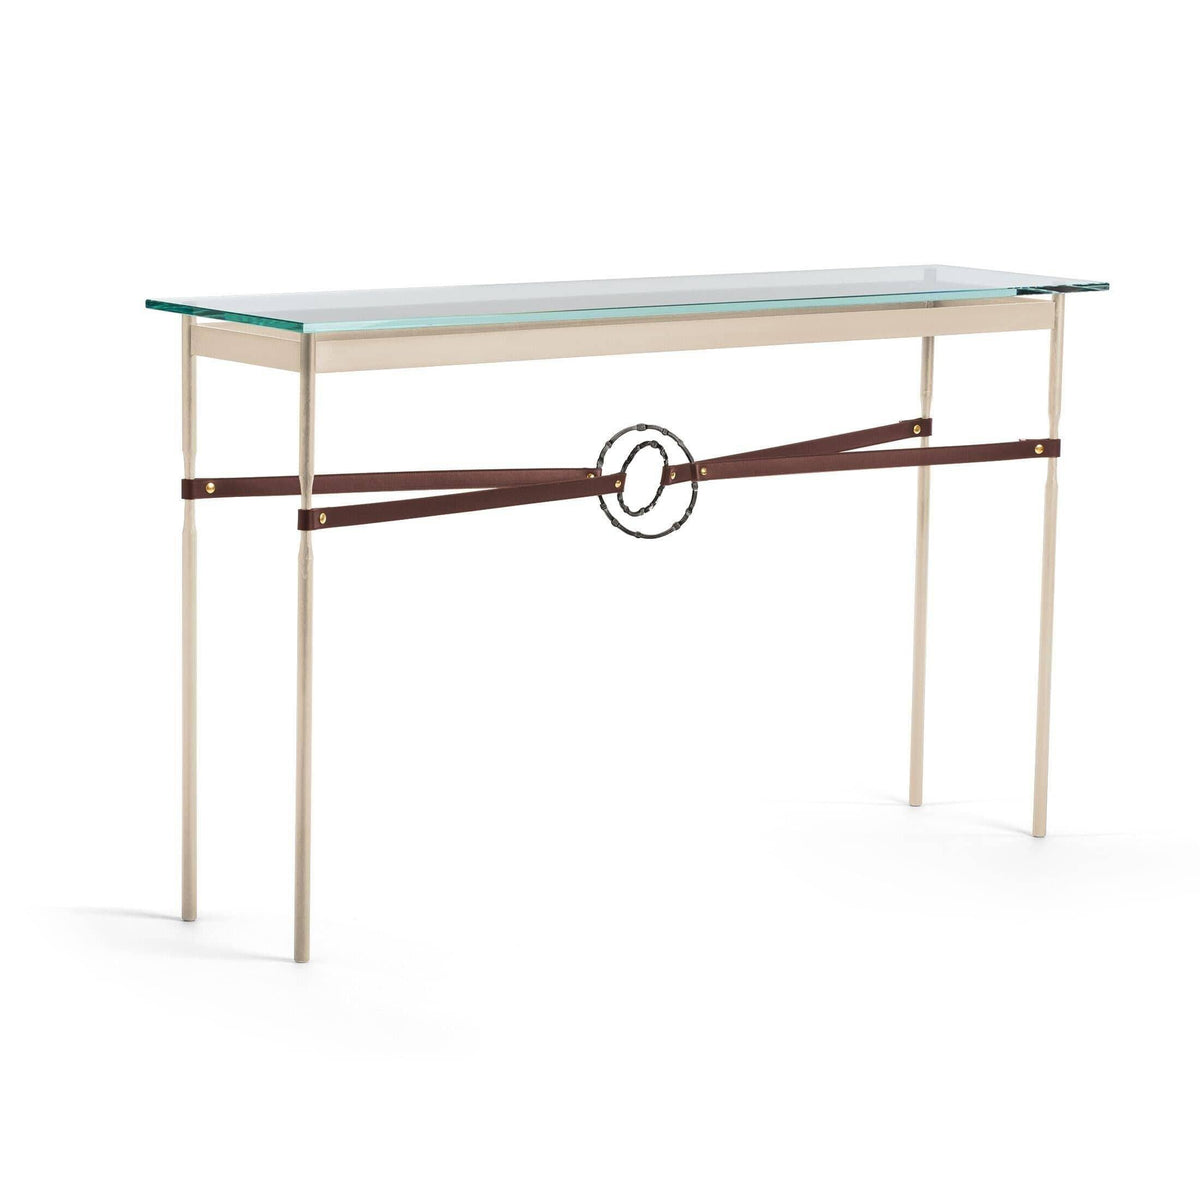 Hubbardton Forge - Equus Brown Leather Console Table - 750118-84-07-LB-VA0714 | Montreal Lighting & Hardware